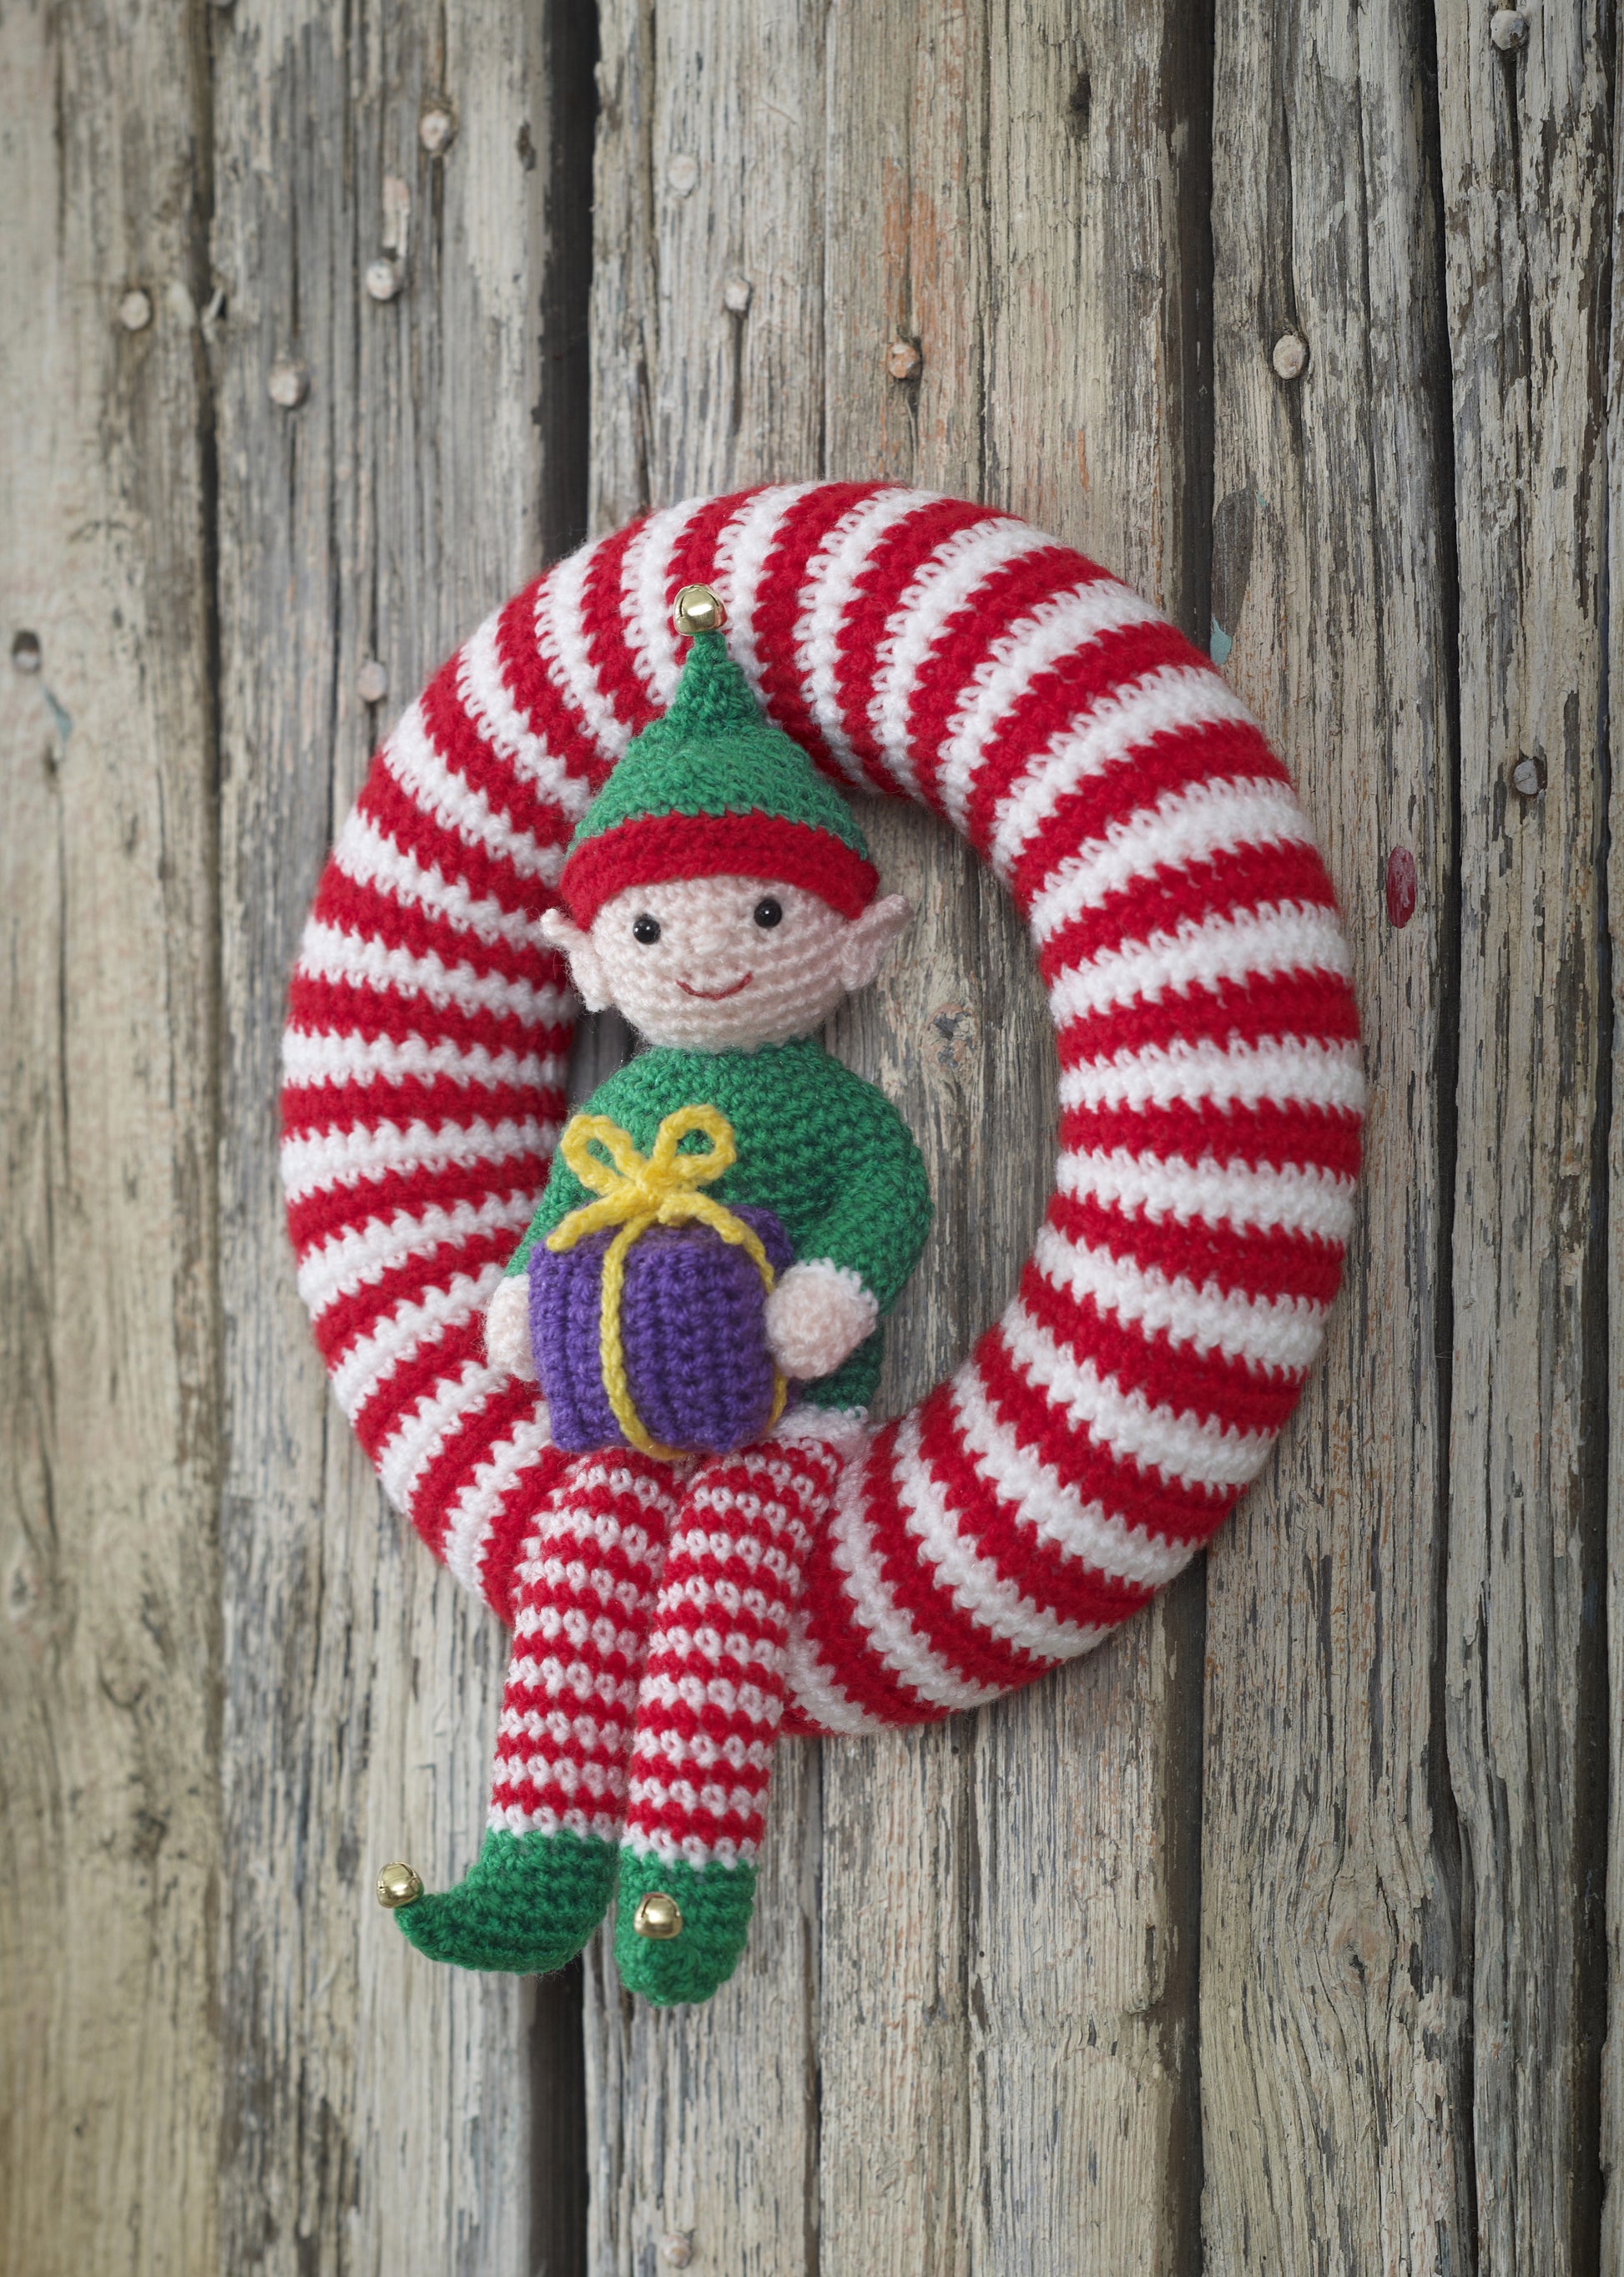 Colourful elf wreath to decorate. A red and white striped wreath with a red and green elf sat on holding a purple gift. This wreath is approximately 78.5cm around the outside of the ring to fit a polystyrene ring of this size.